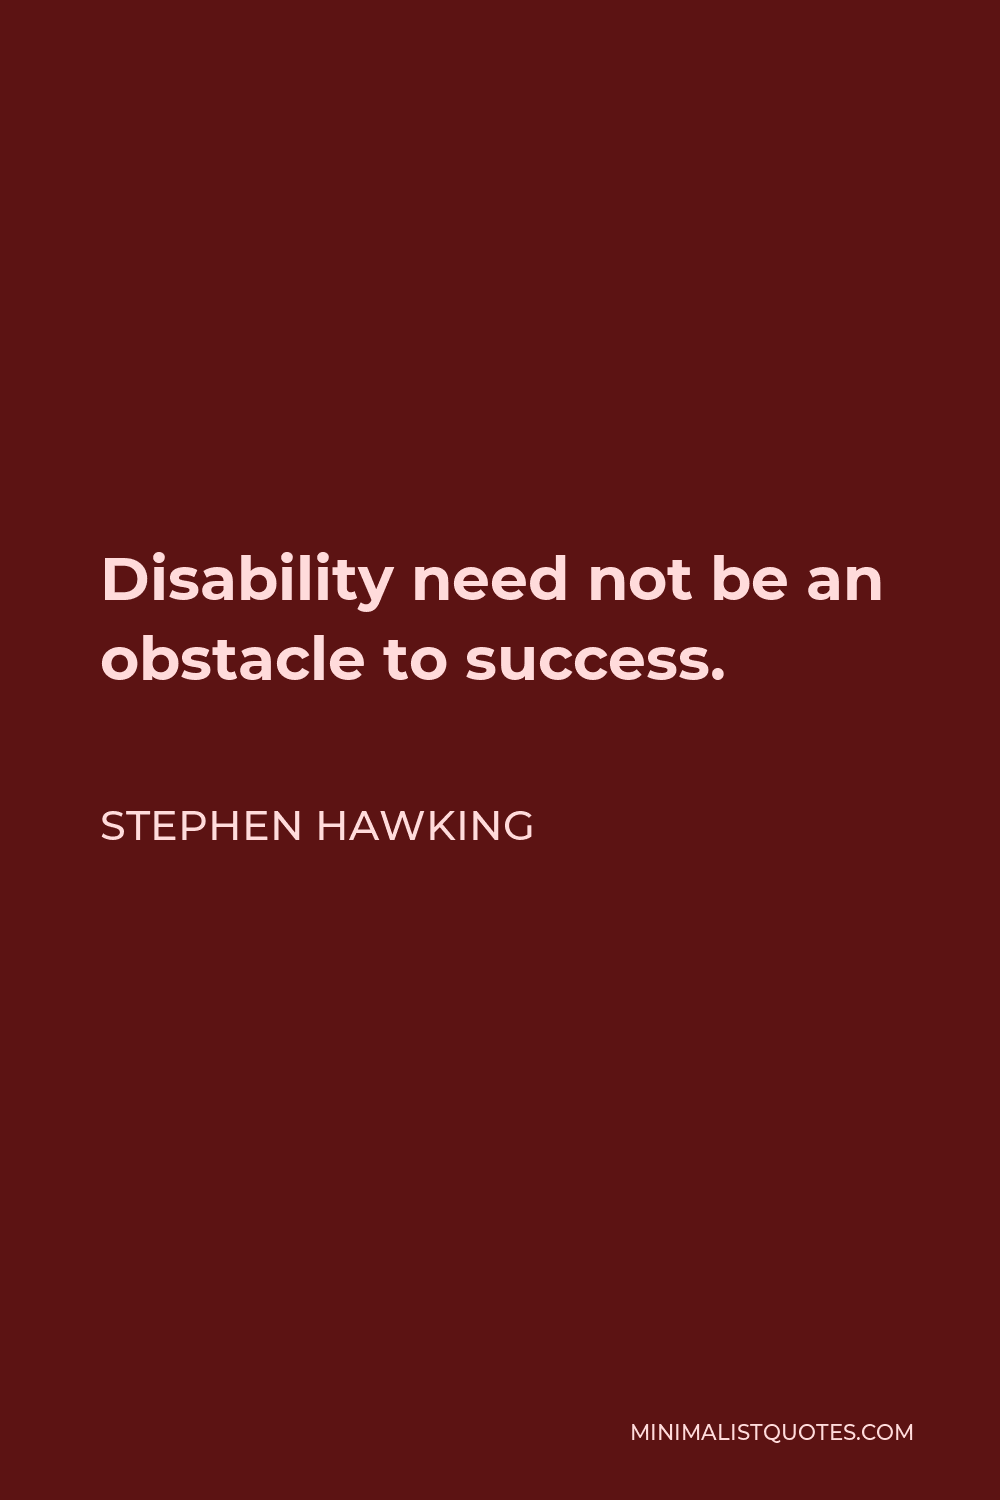 Stephen Hawking Quote - Disability need not be an obstacle to success.